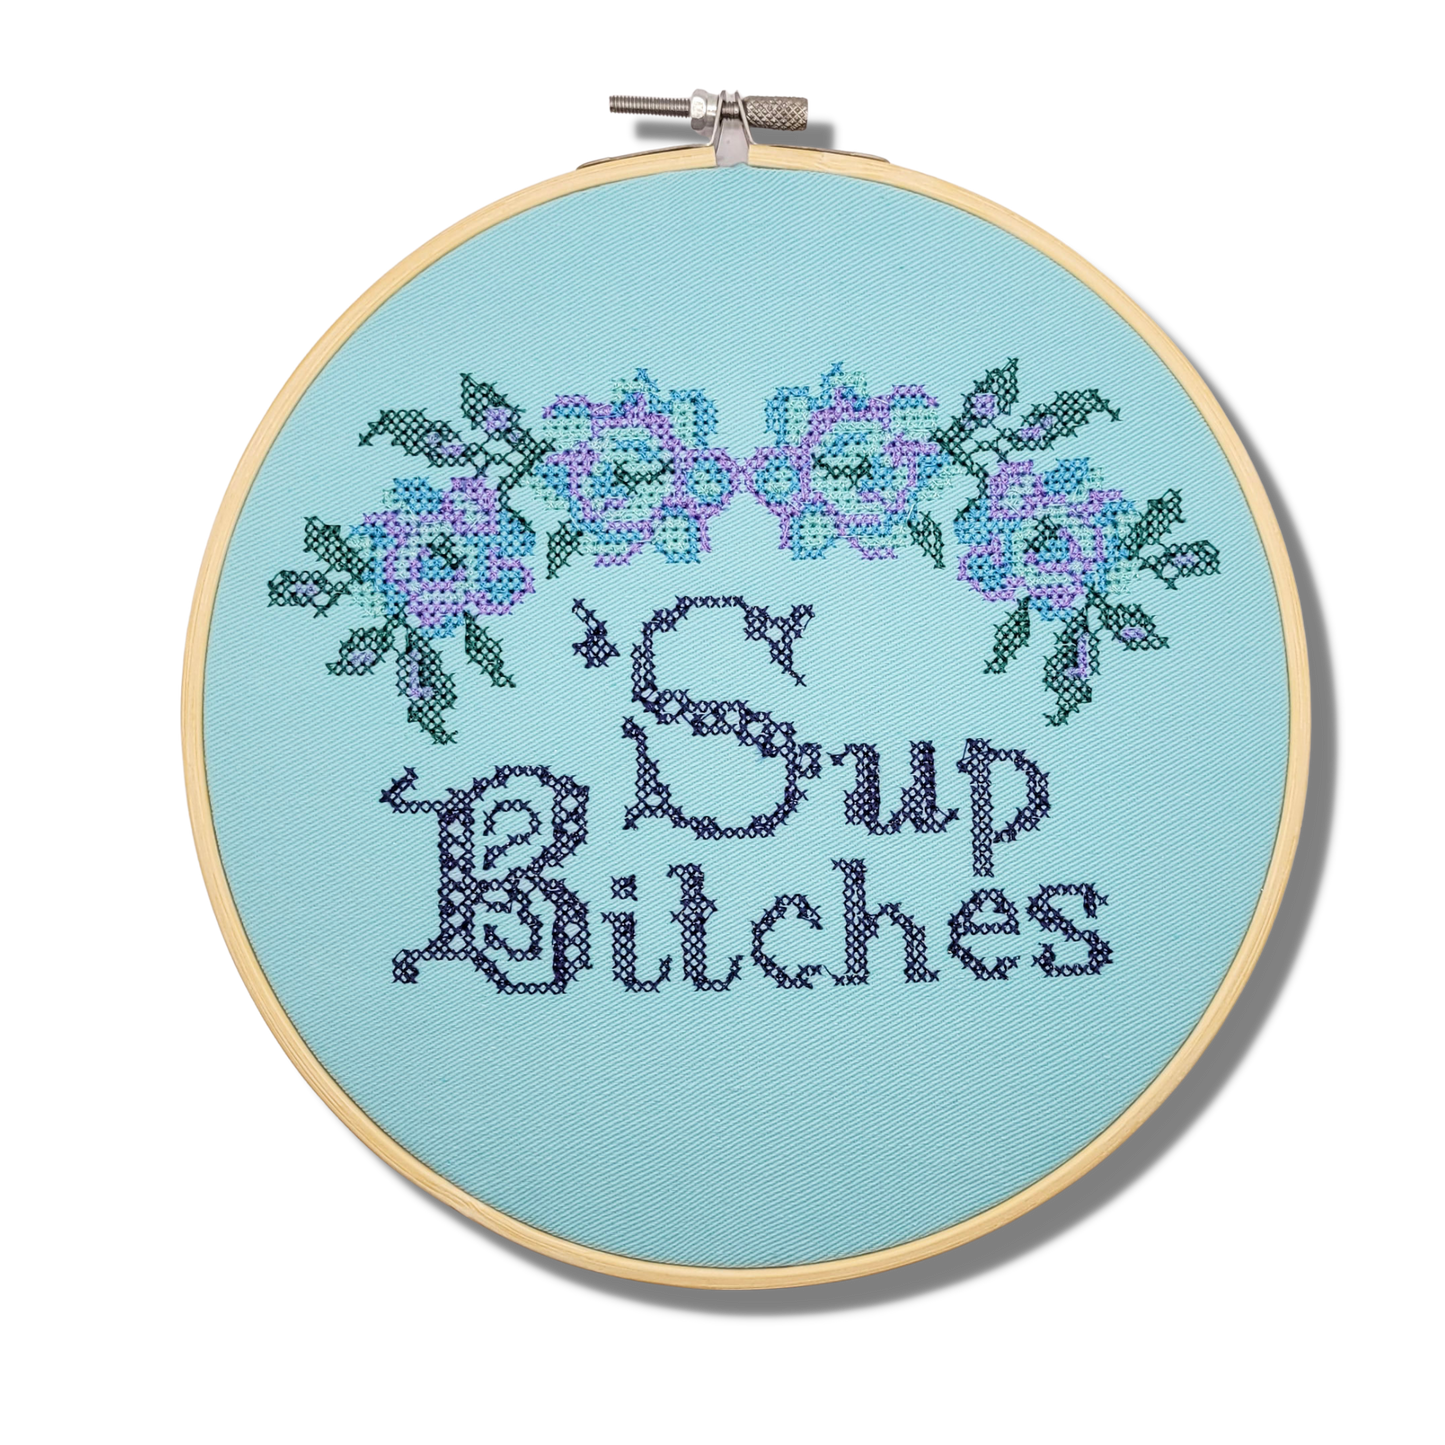 8" 'Sup Bitches Embroidered Wall Hanging